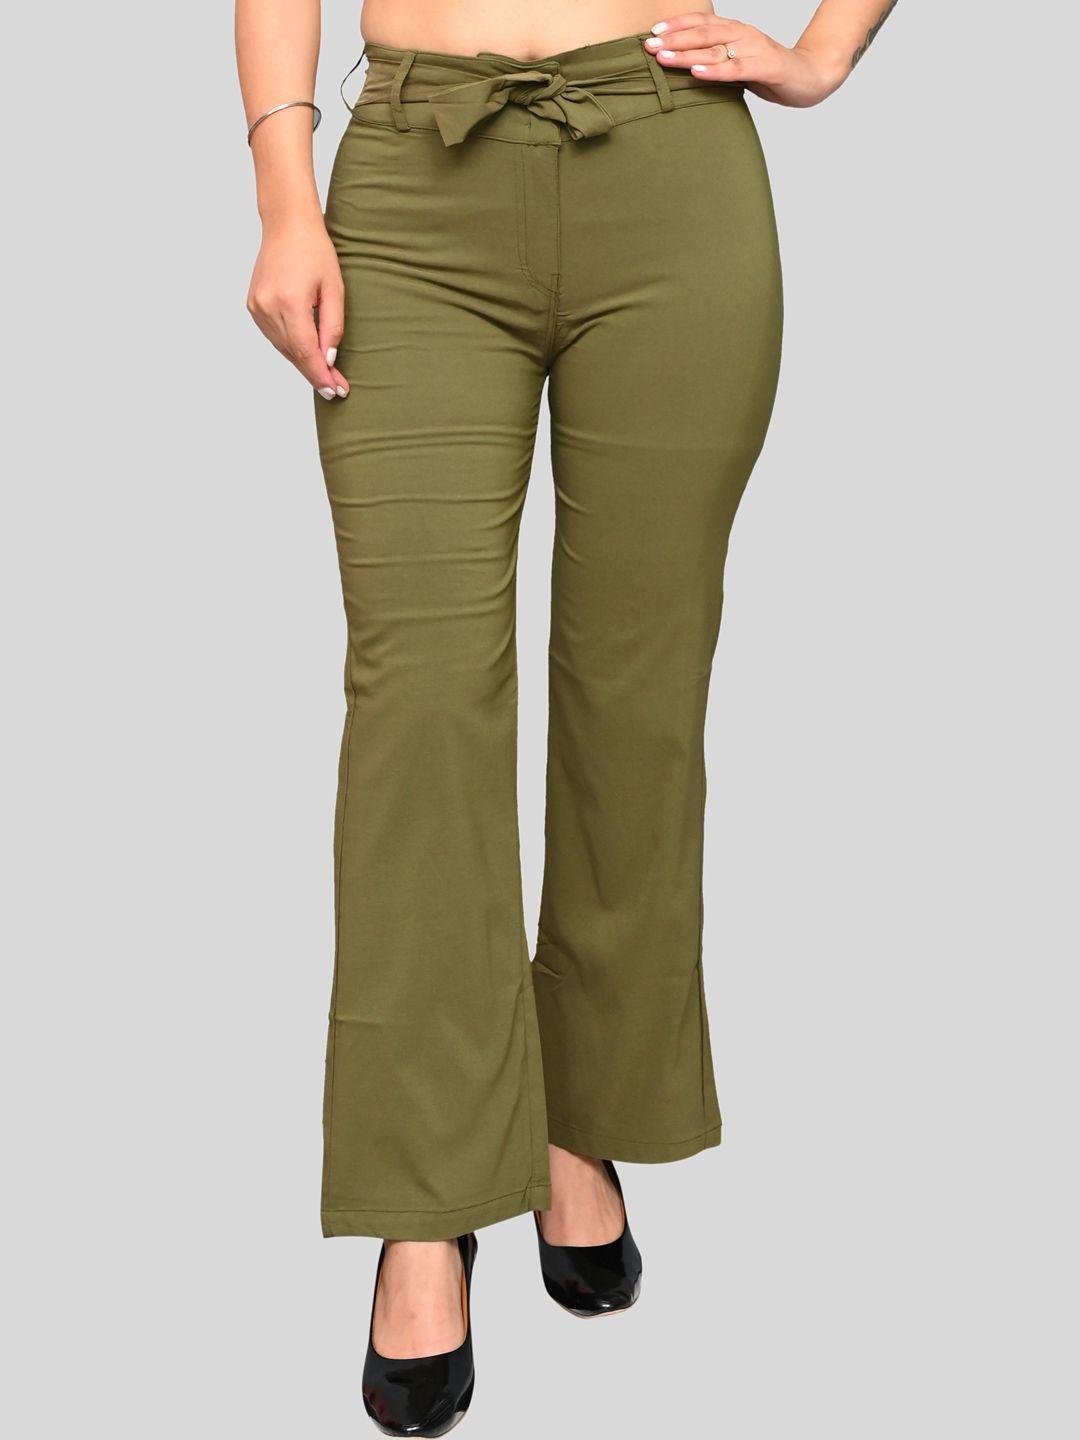 fnocks women olive green relaxed straight leg trousers